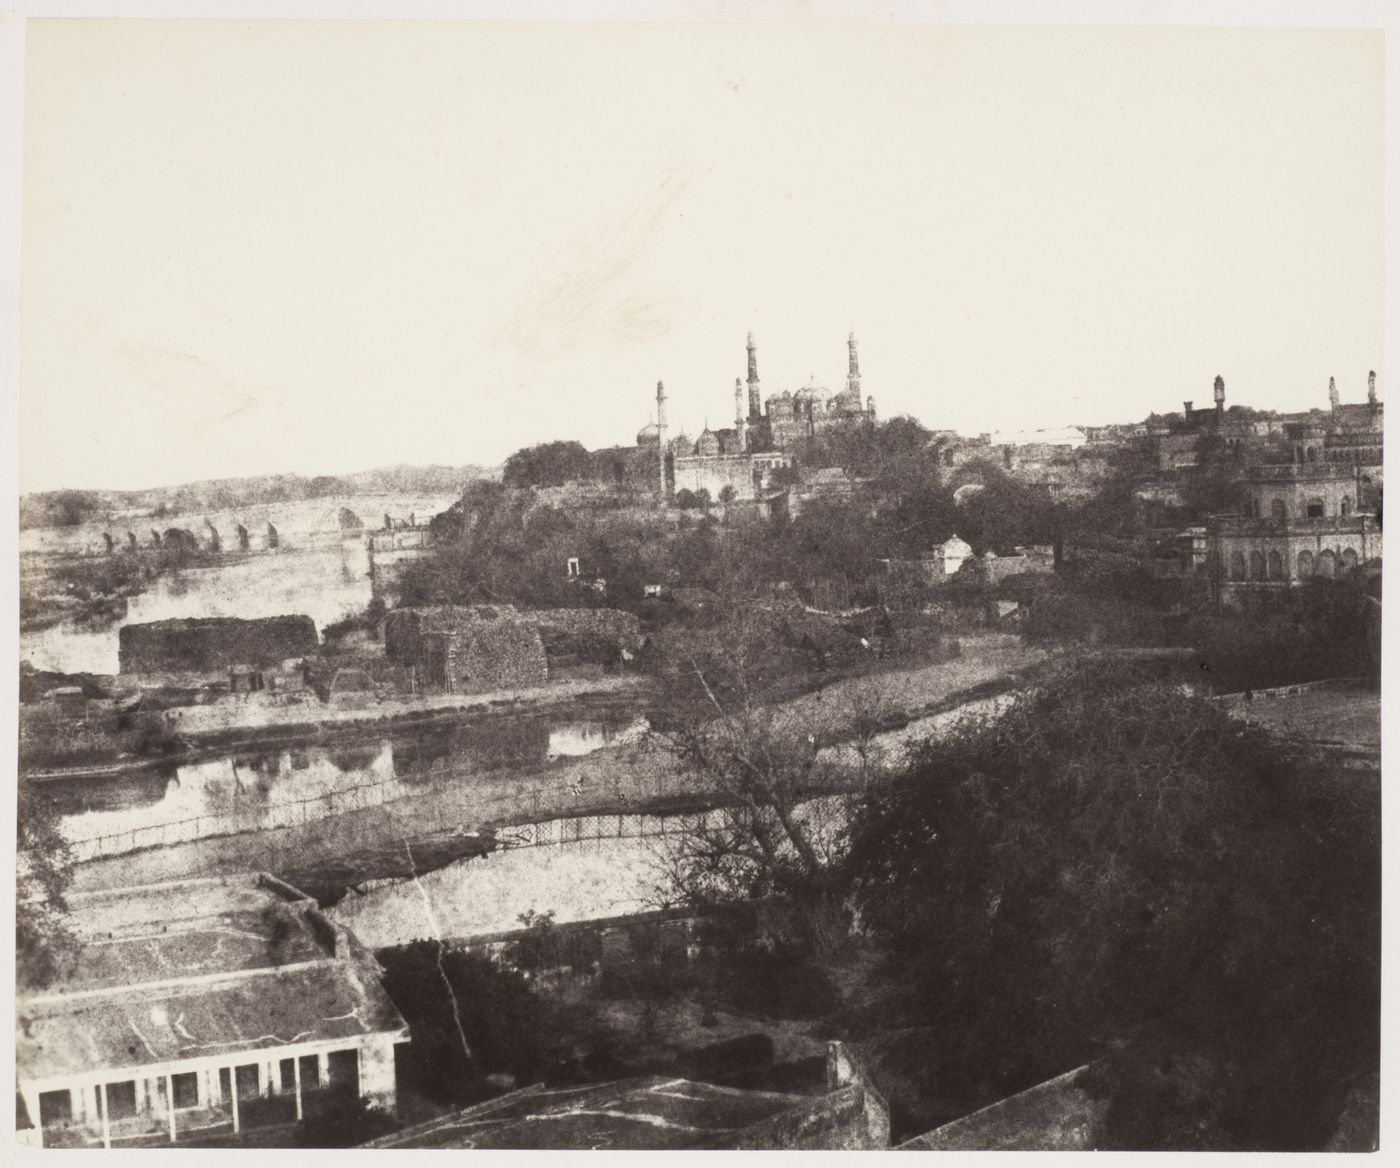 View of Lucknow showing the Great Imambara (also known as the Bara Imambara) in the background, India